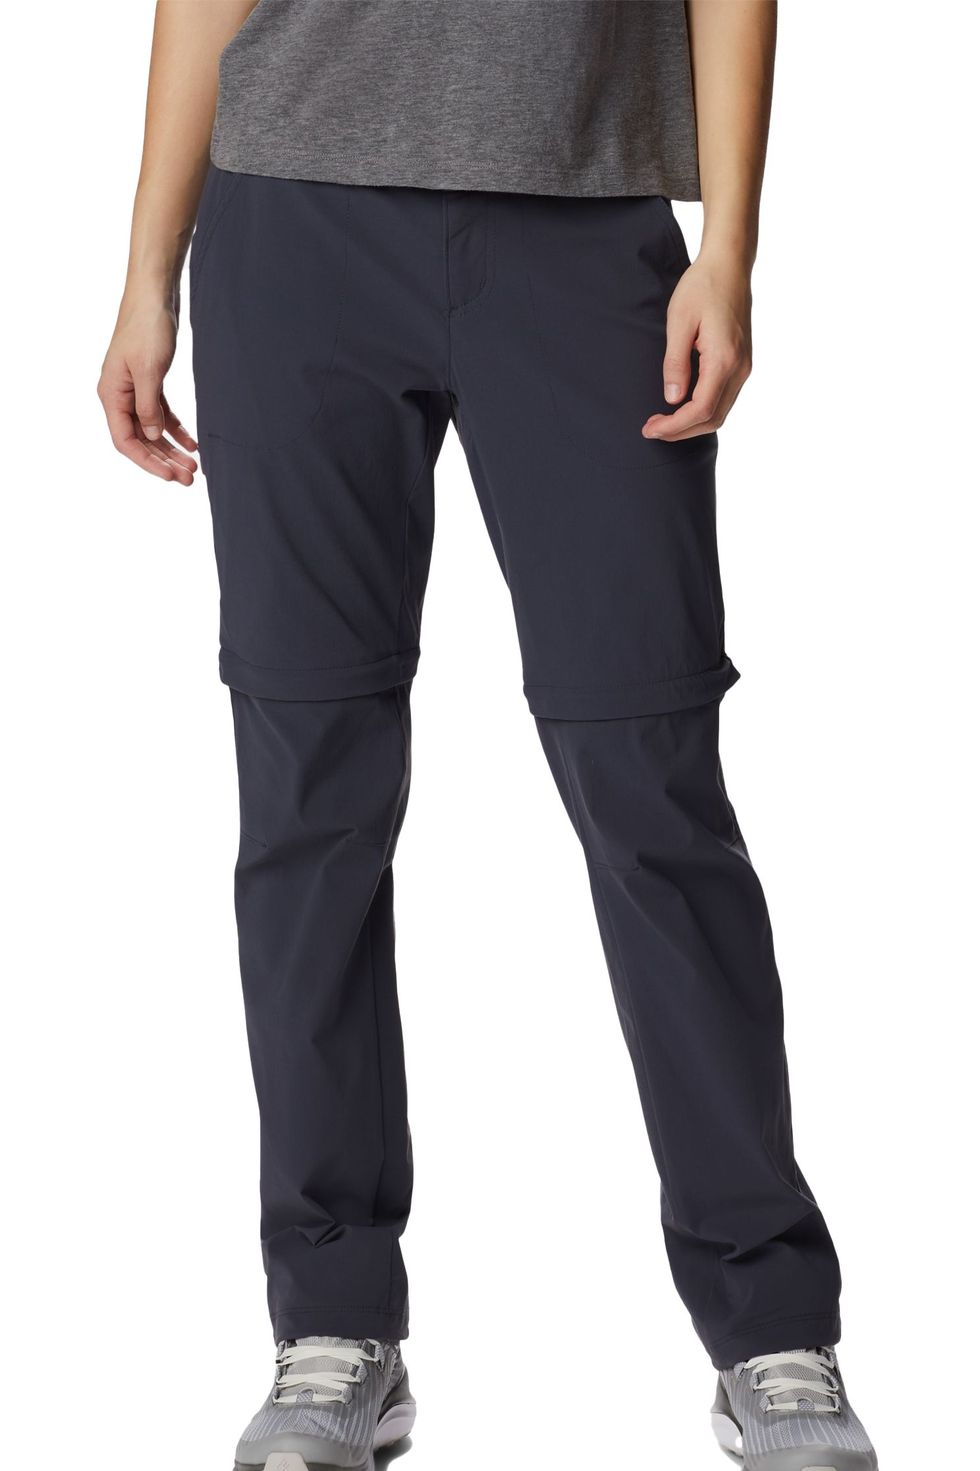 https://hips.hearstapps.com/vader-prod.s3.amazonaws.com/1676475584-best-womens-walking-trousers-columbia-womens-saturday-trail-convertible-hiking-trousers-1676475565.jpg?crop=0.646xw:0.924xh;0.186xw,0.0550xh&resize=980:*